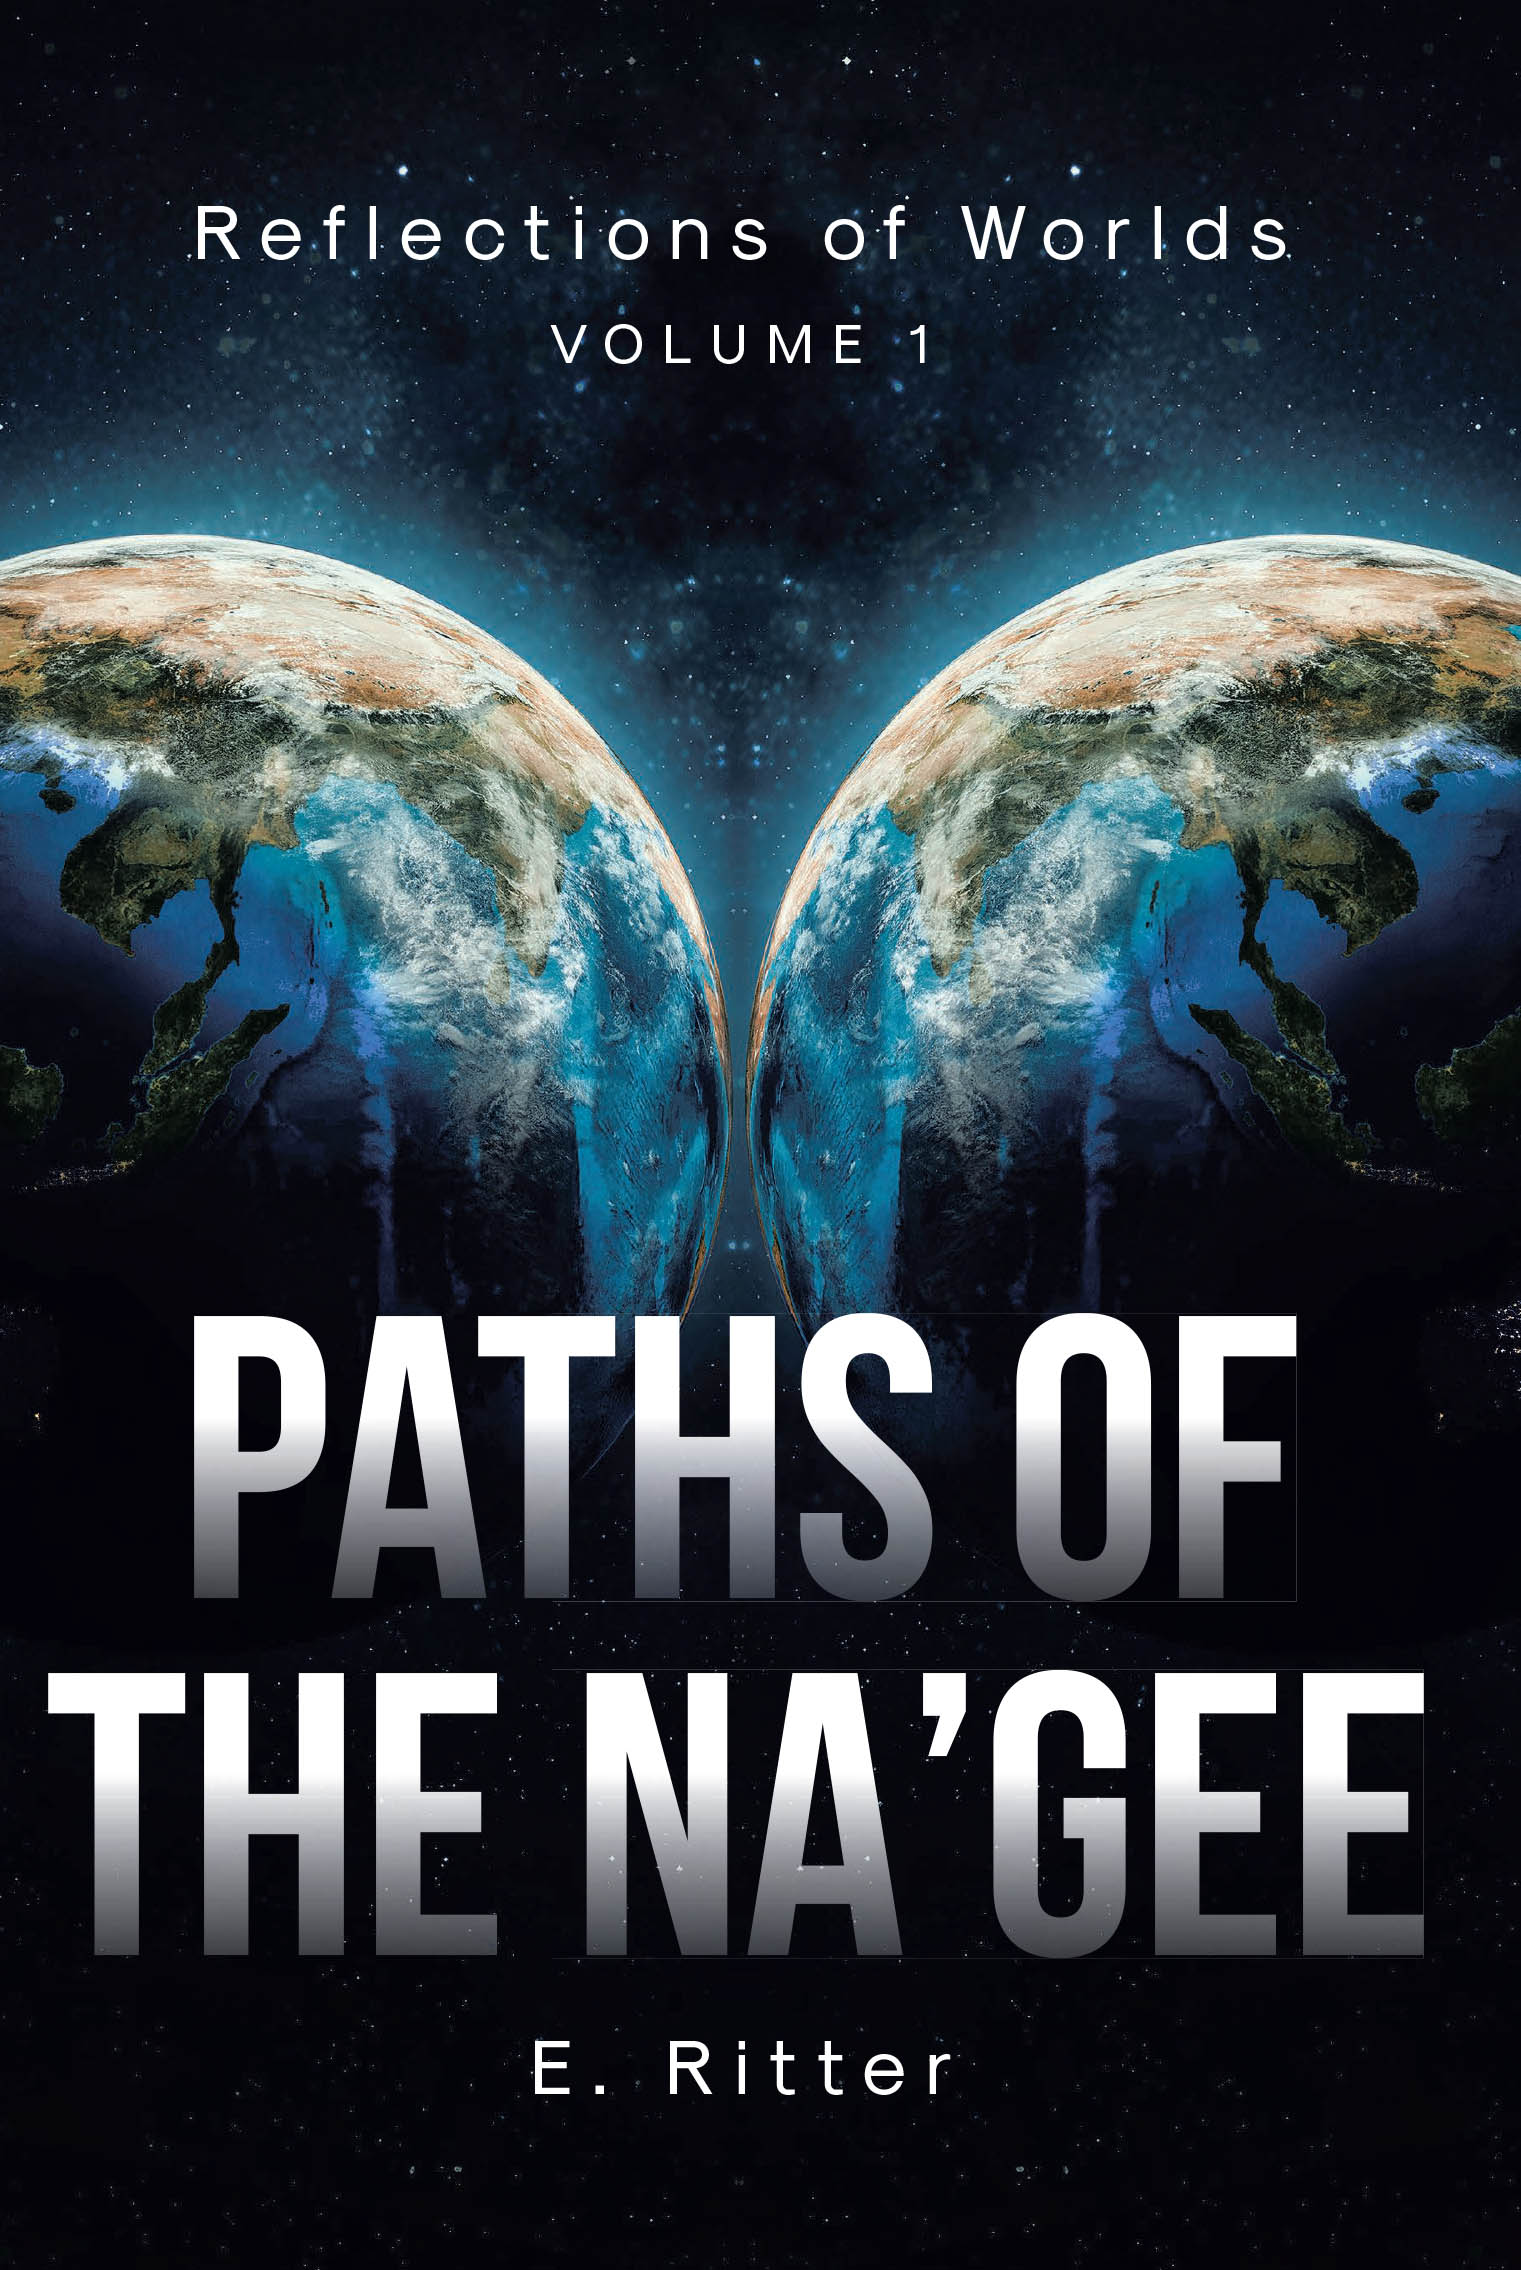 Author E. Ritter’s New Book, "Paths of the Na'gee," is a Captivating New Fantasy Adventure Set Against the Backdrop of Mystical Worlds with Unseen Threats